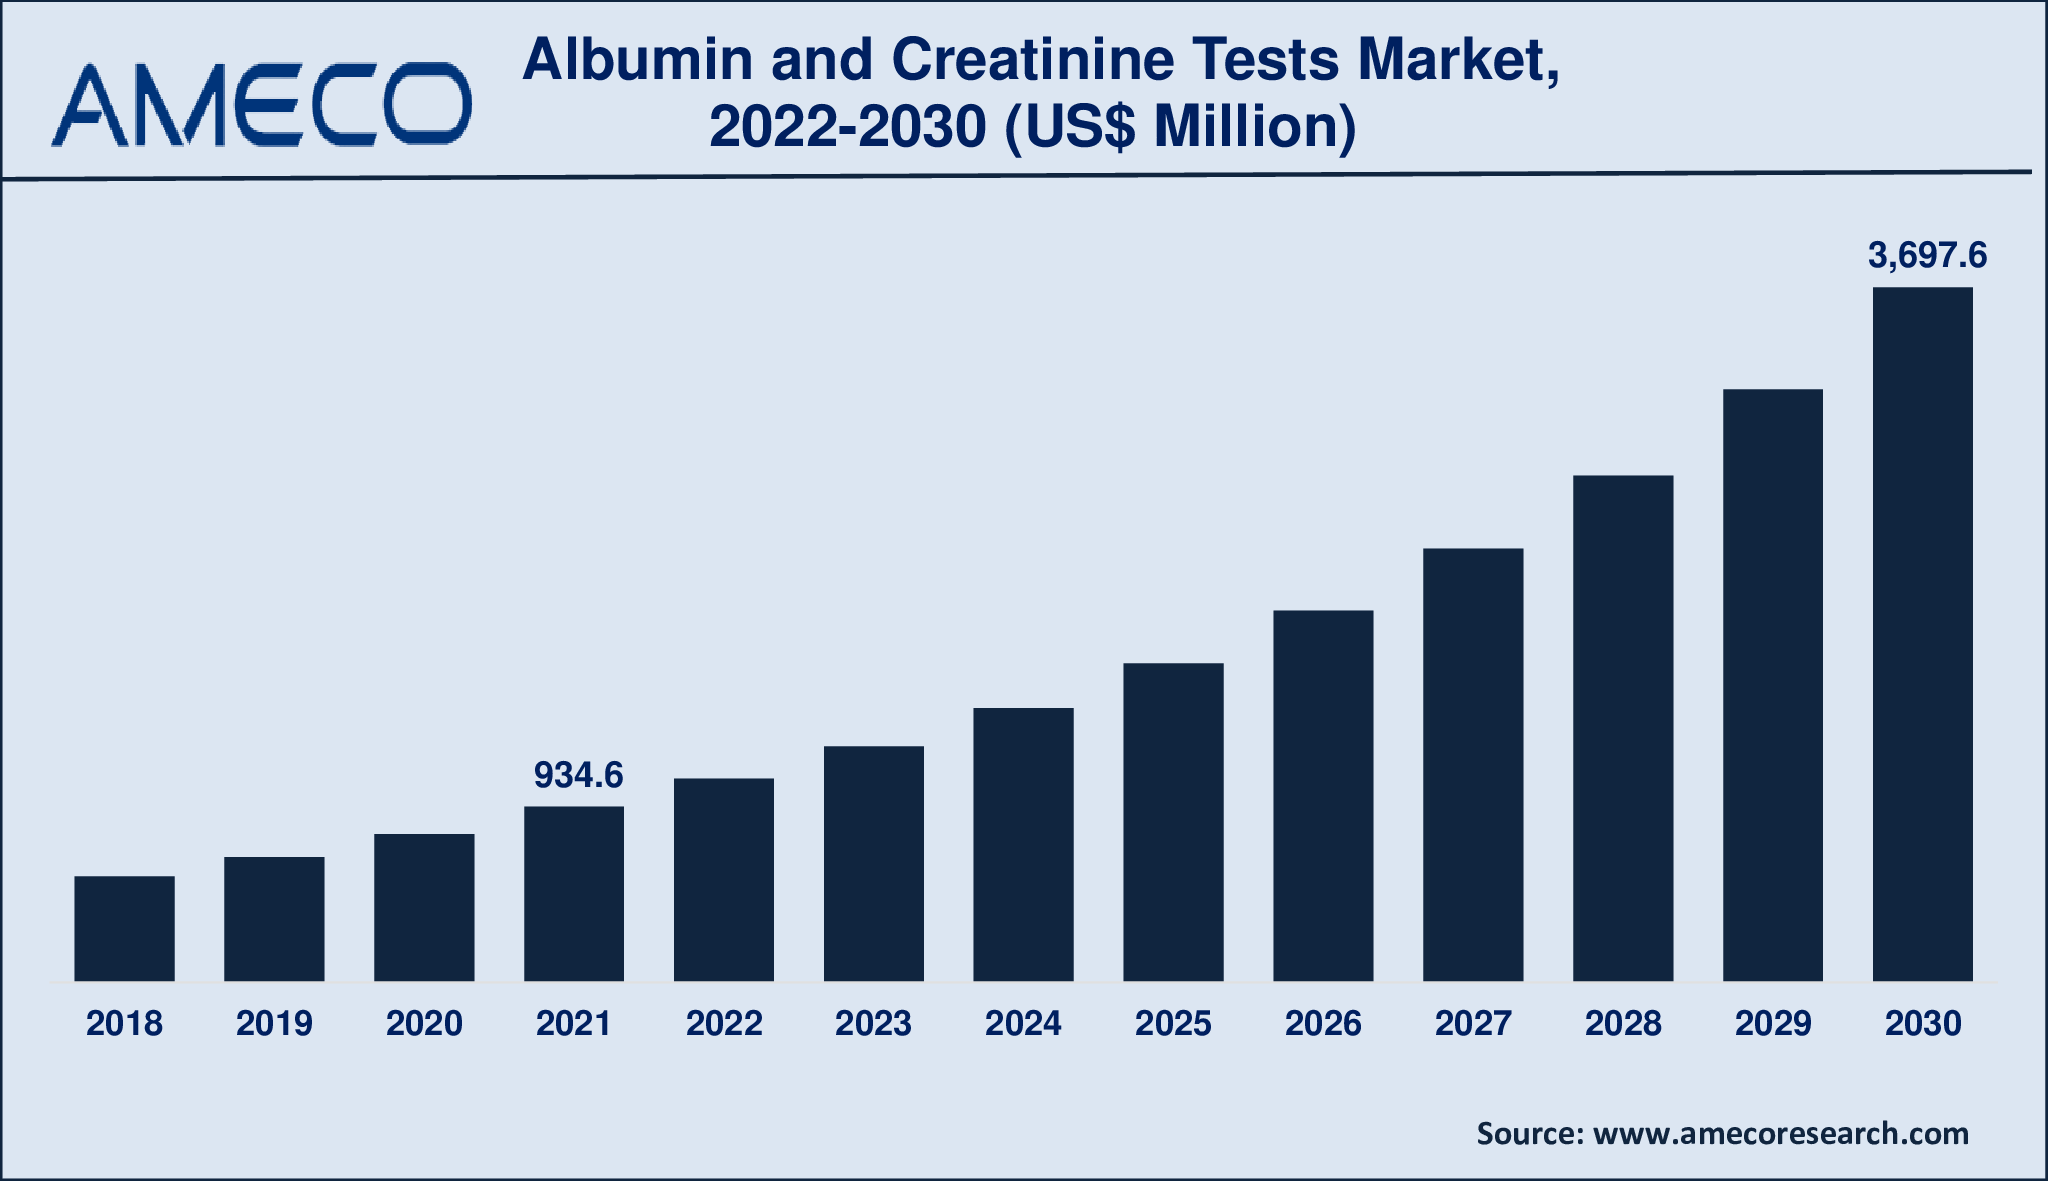 Albumin and Creatinine Tests Market Size, Share, Growth, Trends, and Forecast 2022-2030